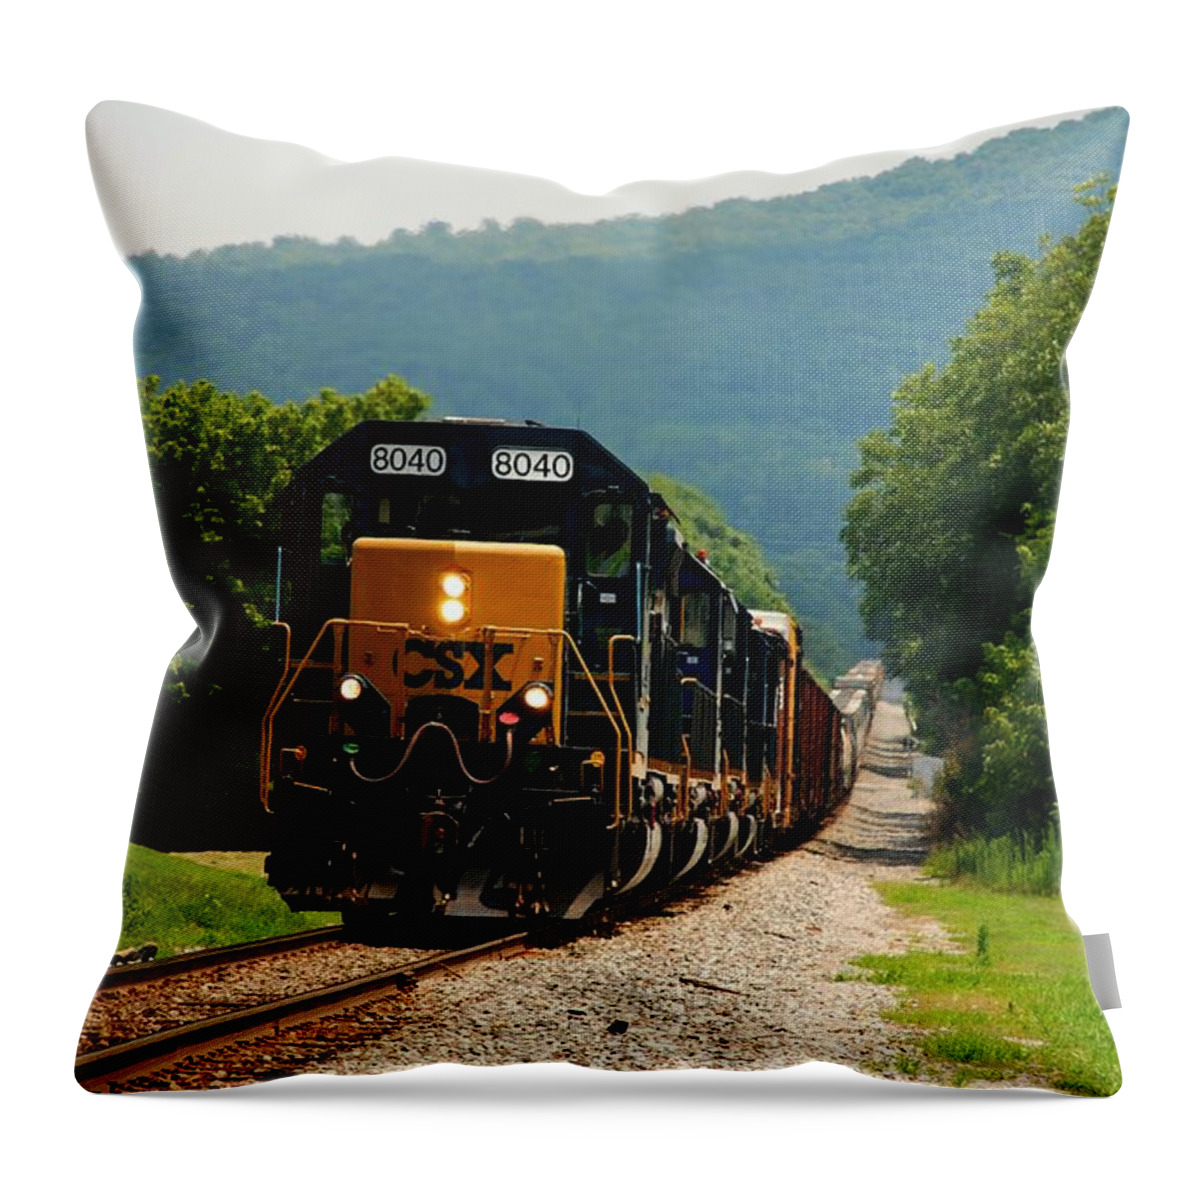 Train Throw Pillow featuring the photograph Freight Train by Kenny Glover